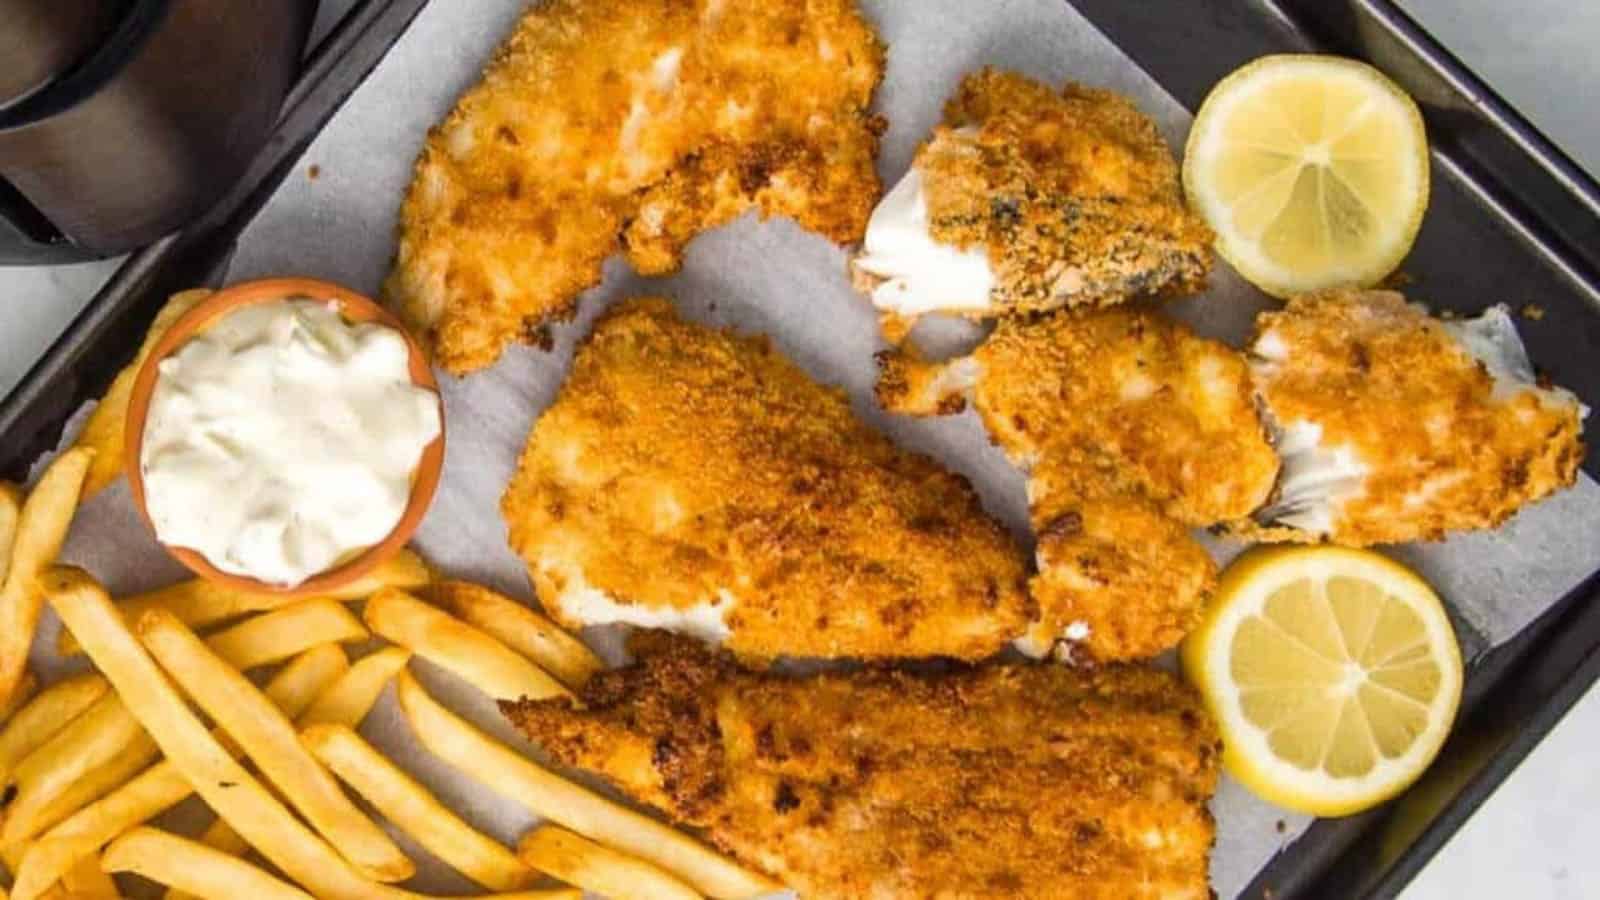 Fried fish and fries on a tray.